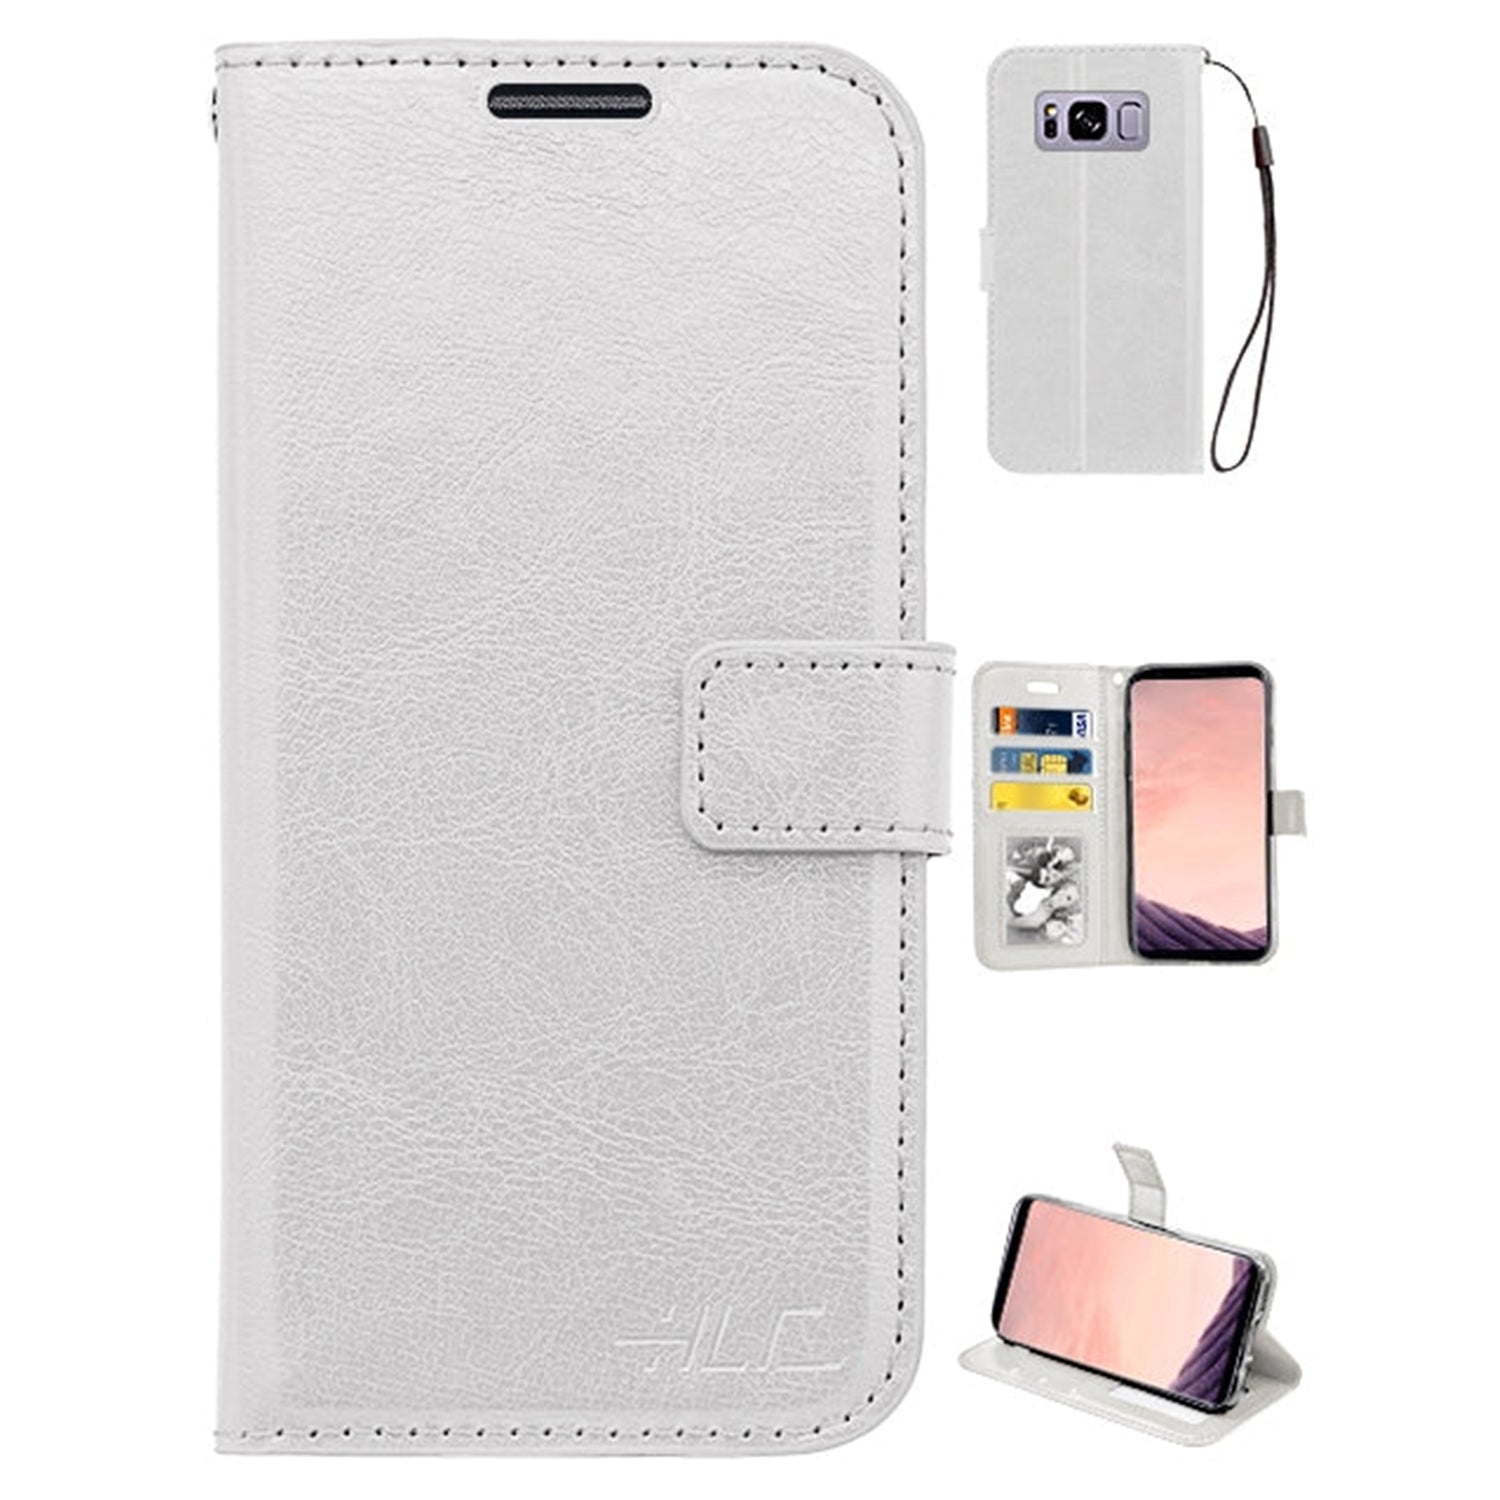 Real Plain Leather Wallet Case for Galaxy S8 Plus